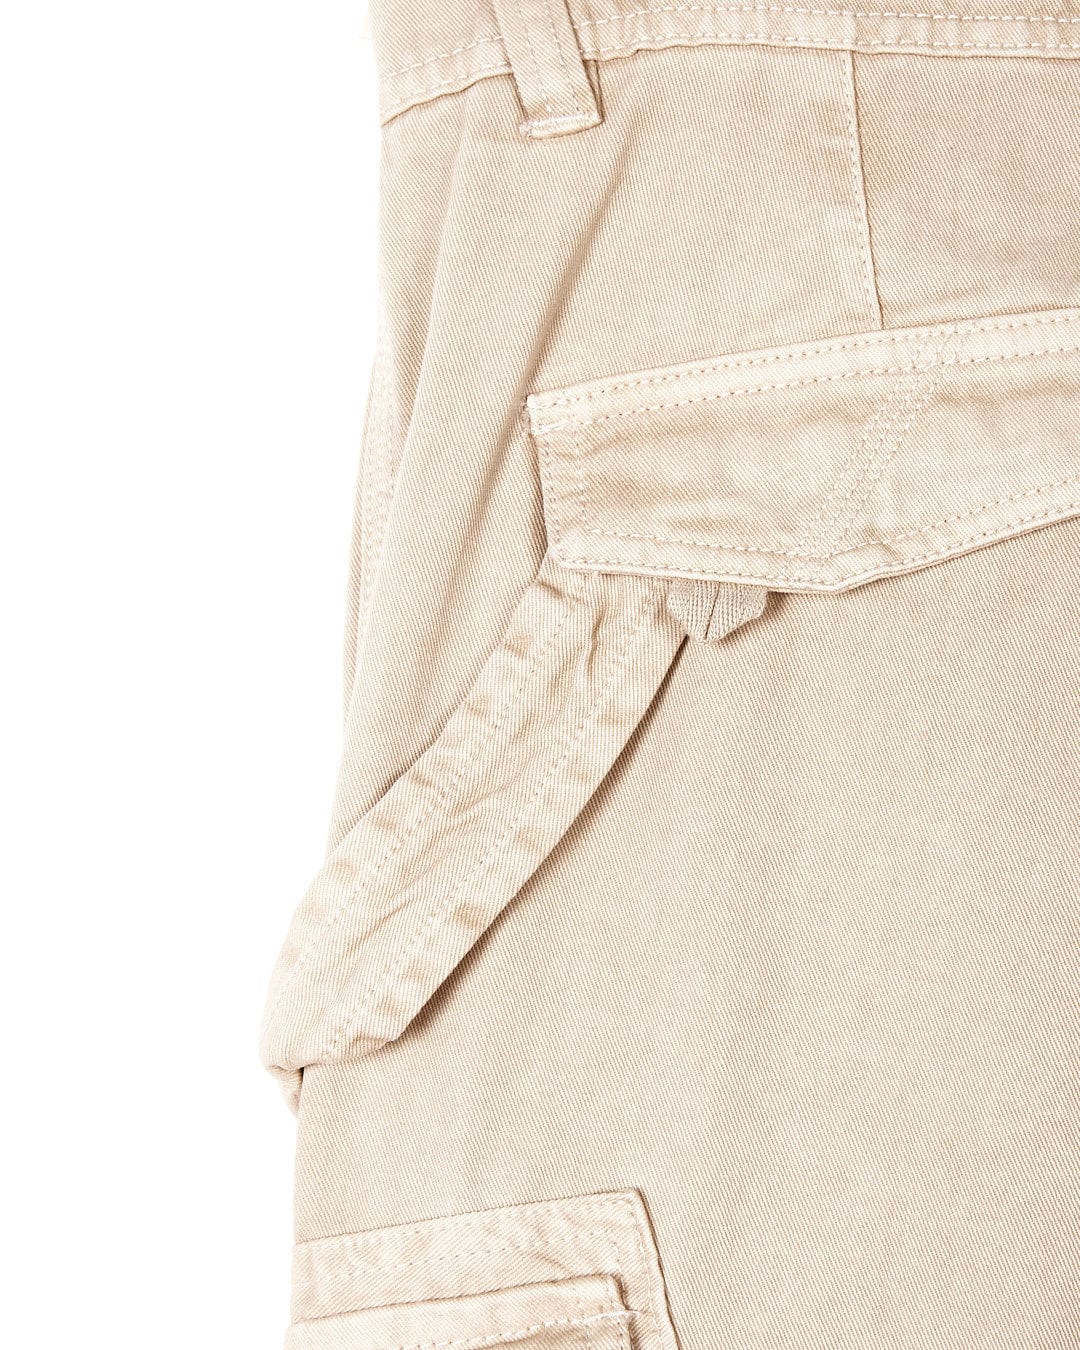 A close up image of the Saltrock Godrevy - Mens Cargo Trouser - Sand.